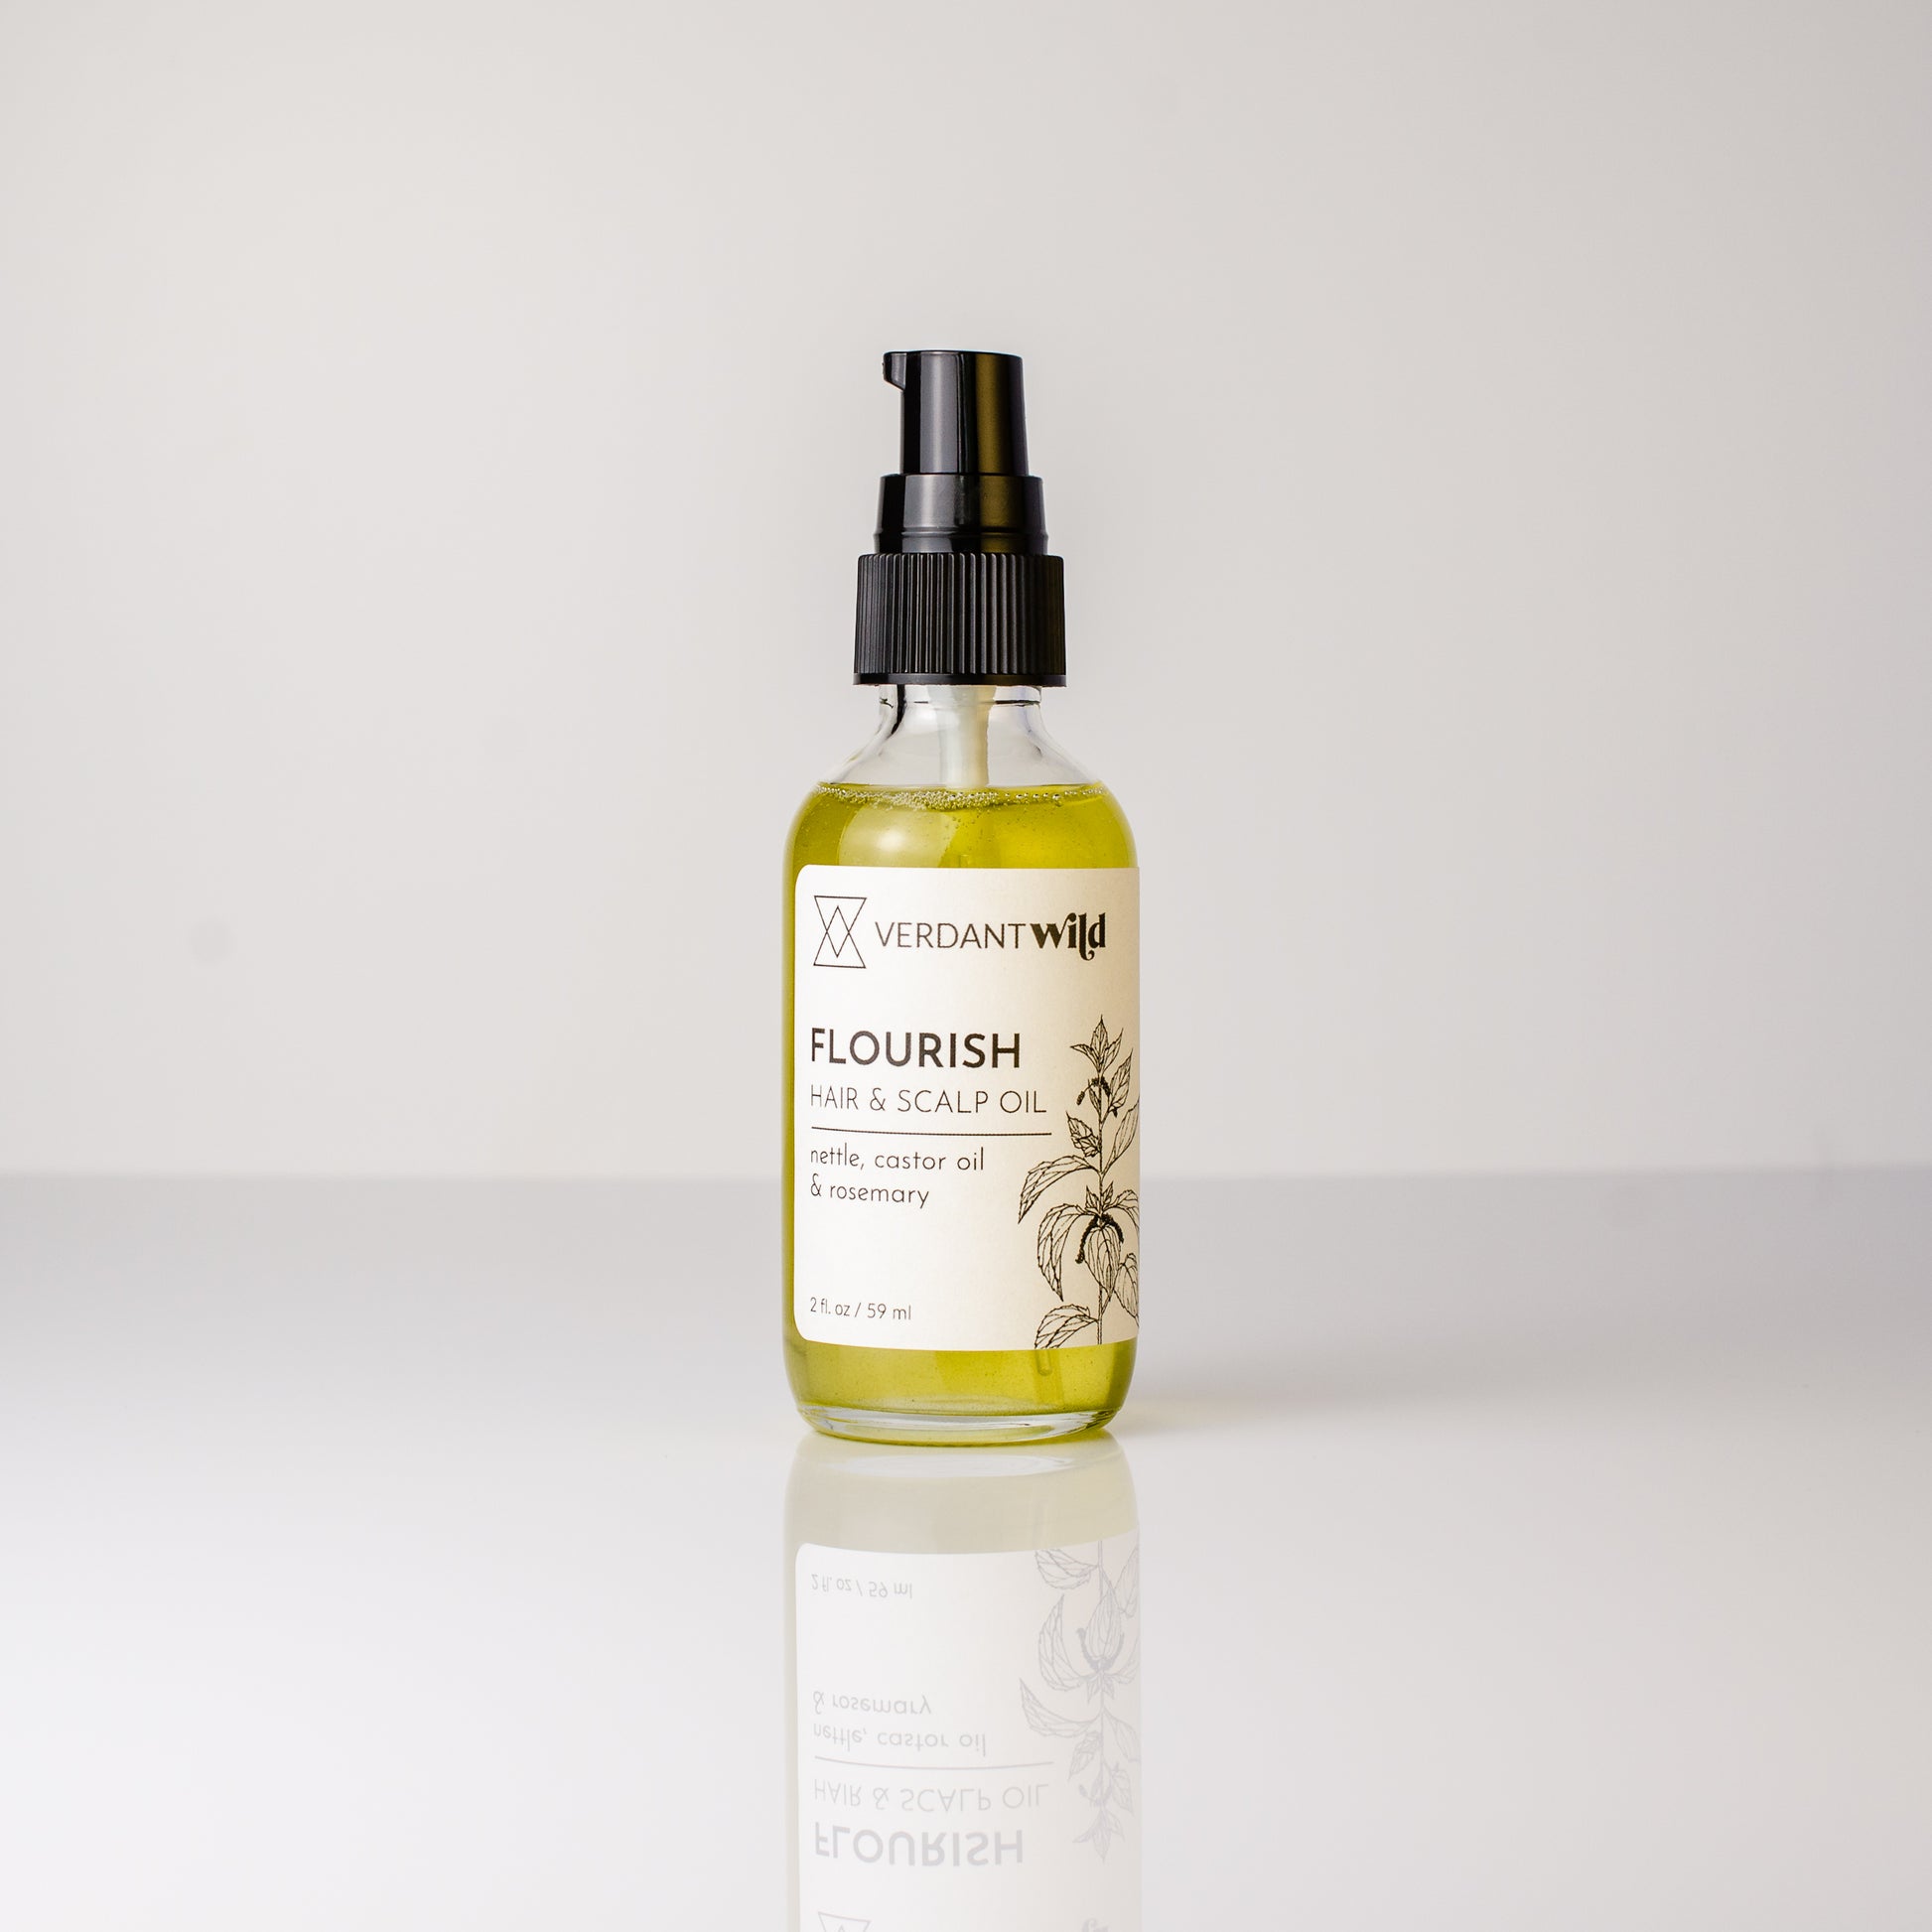 wildcrafted nettle, castor oil and rosemary hair and scalp oil open